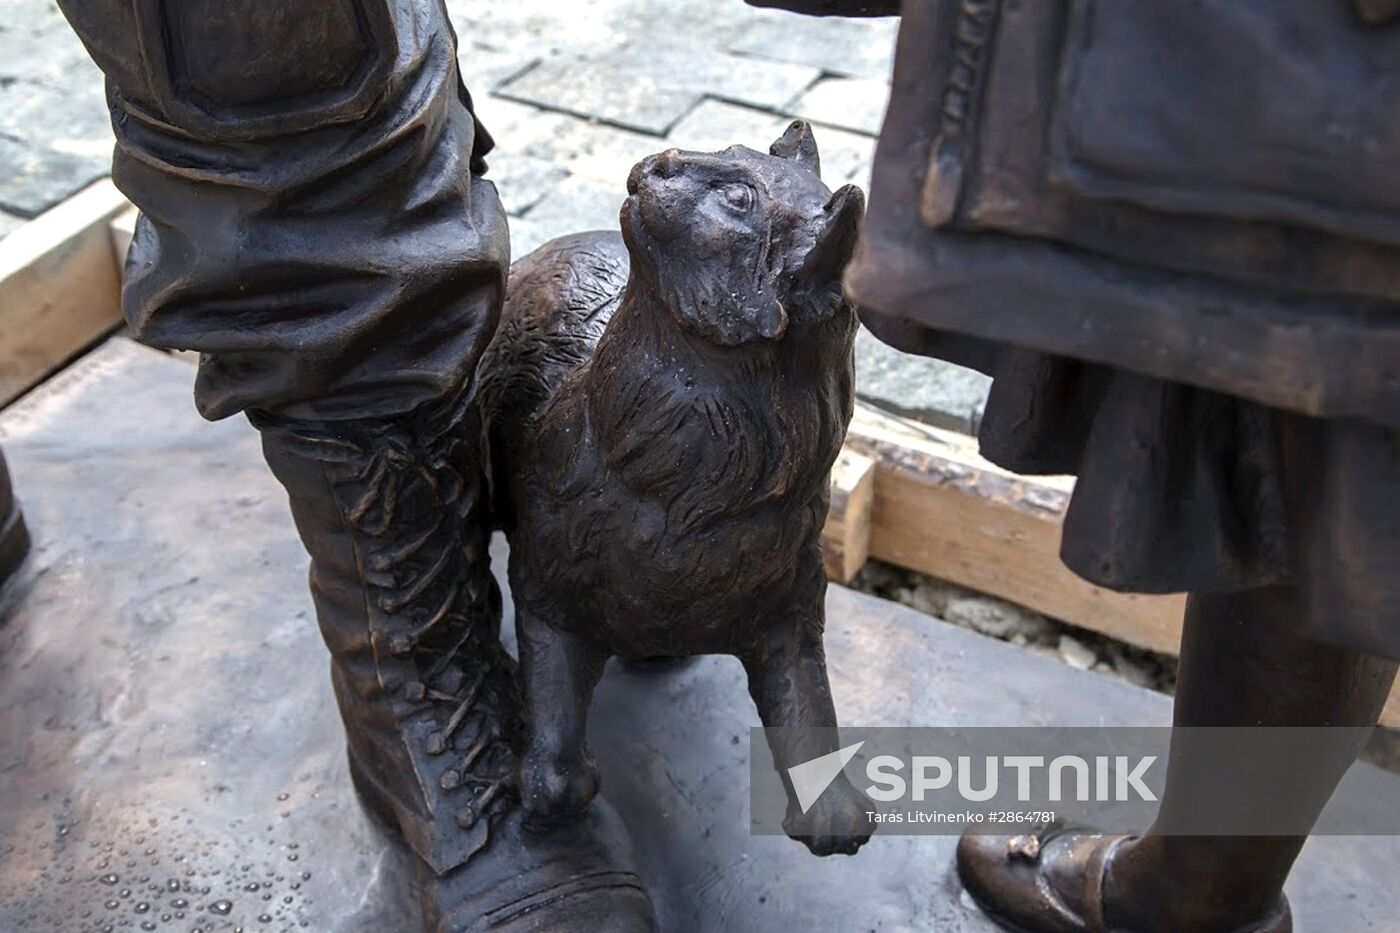 The Polite People monument installed in Simferopol